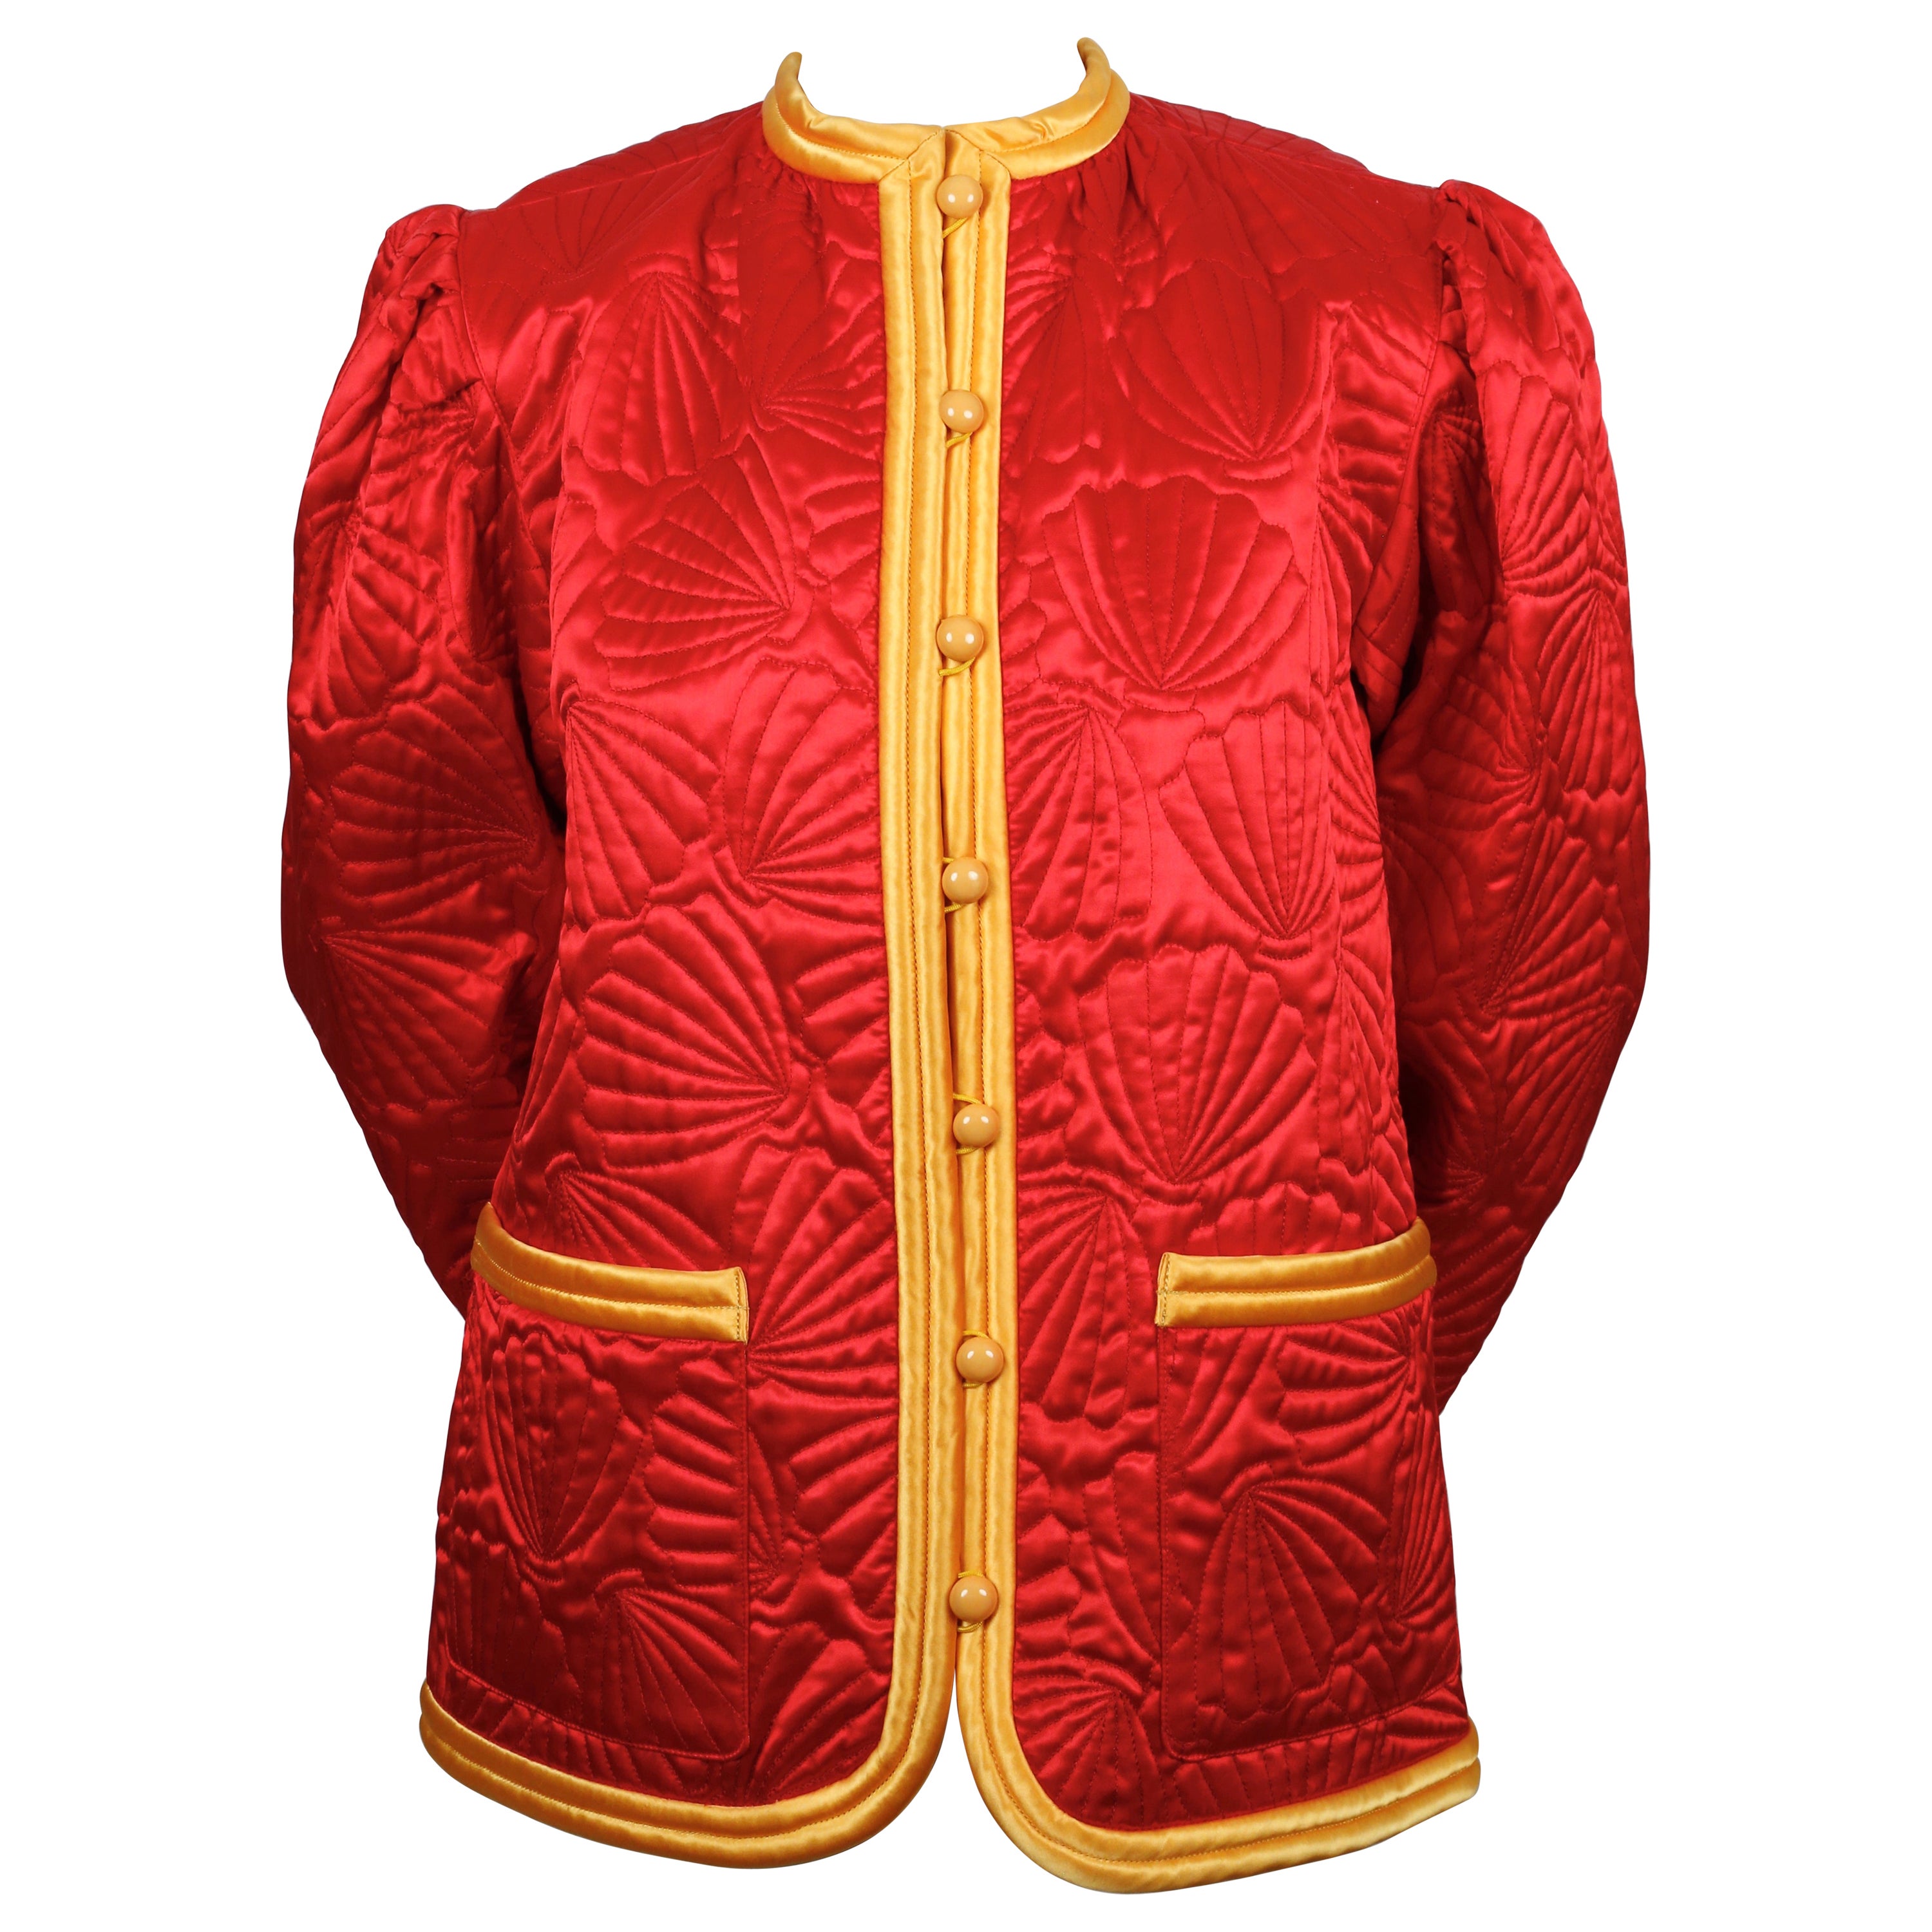 1979 SAINT LAURENT red satin RUNWAY jacket with seashell embroidery   For Sale